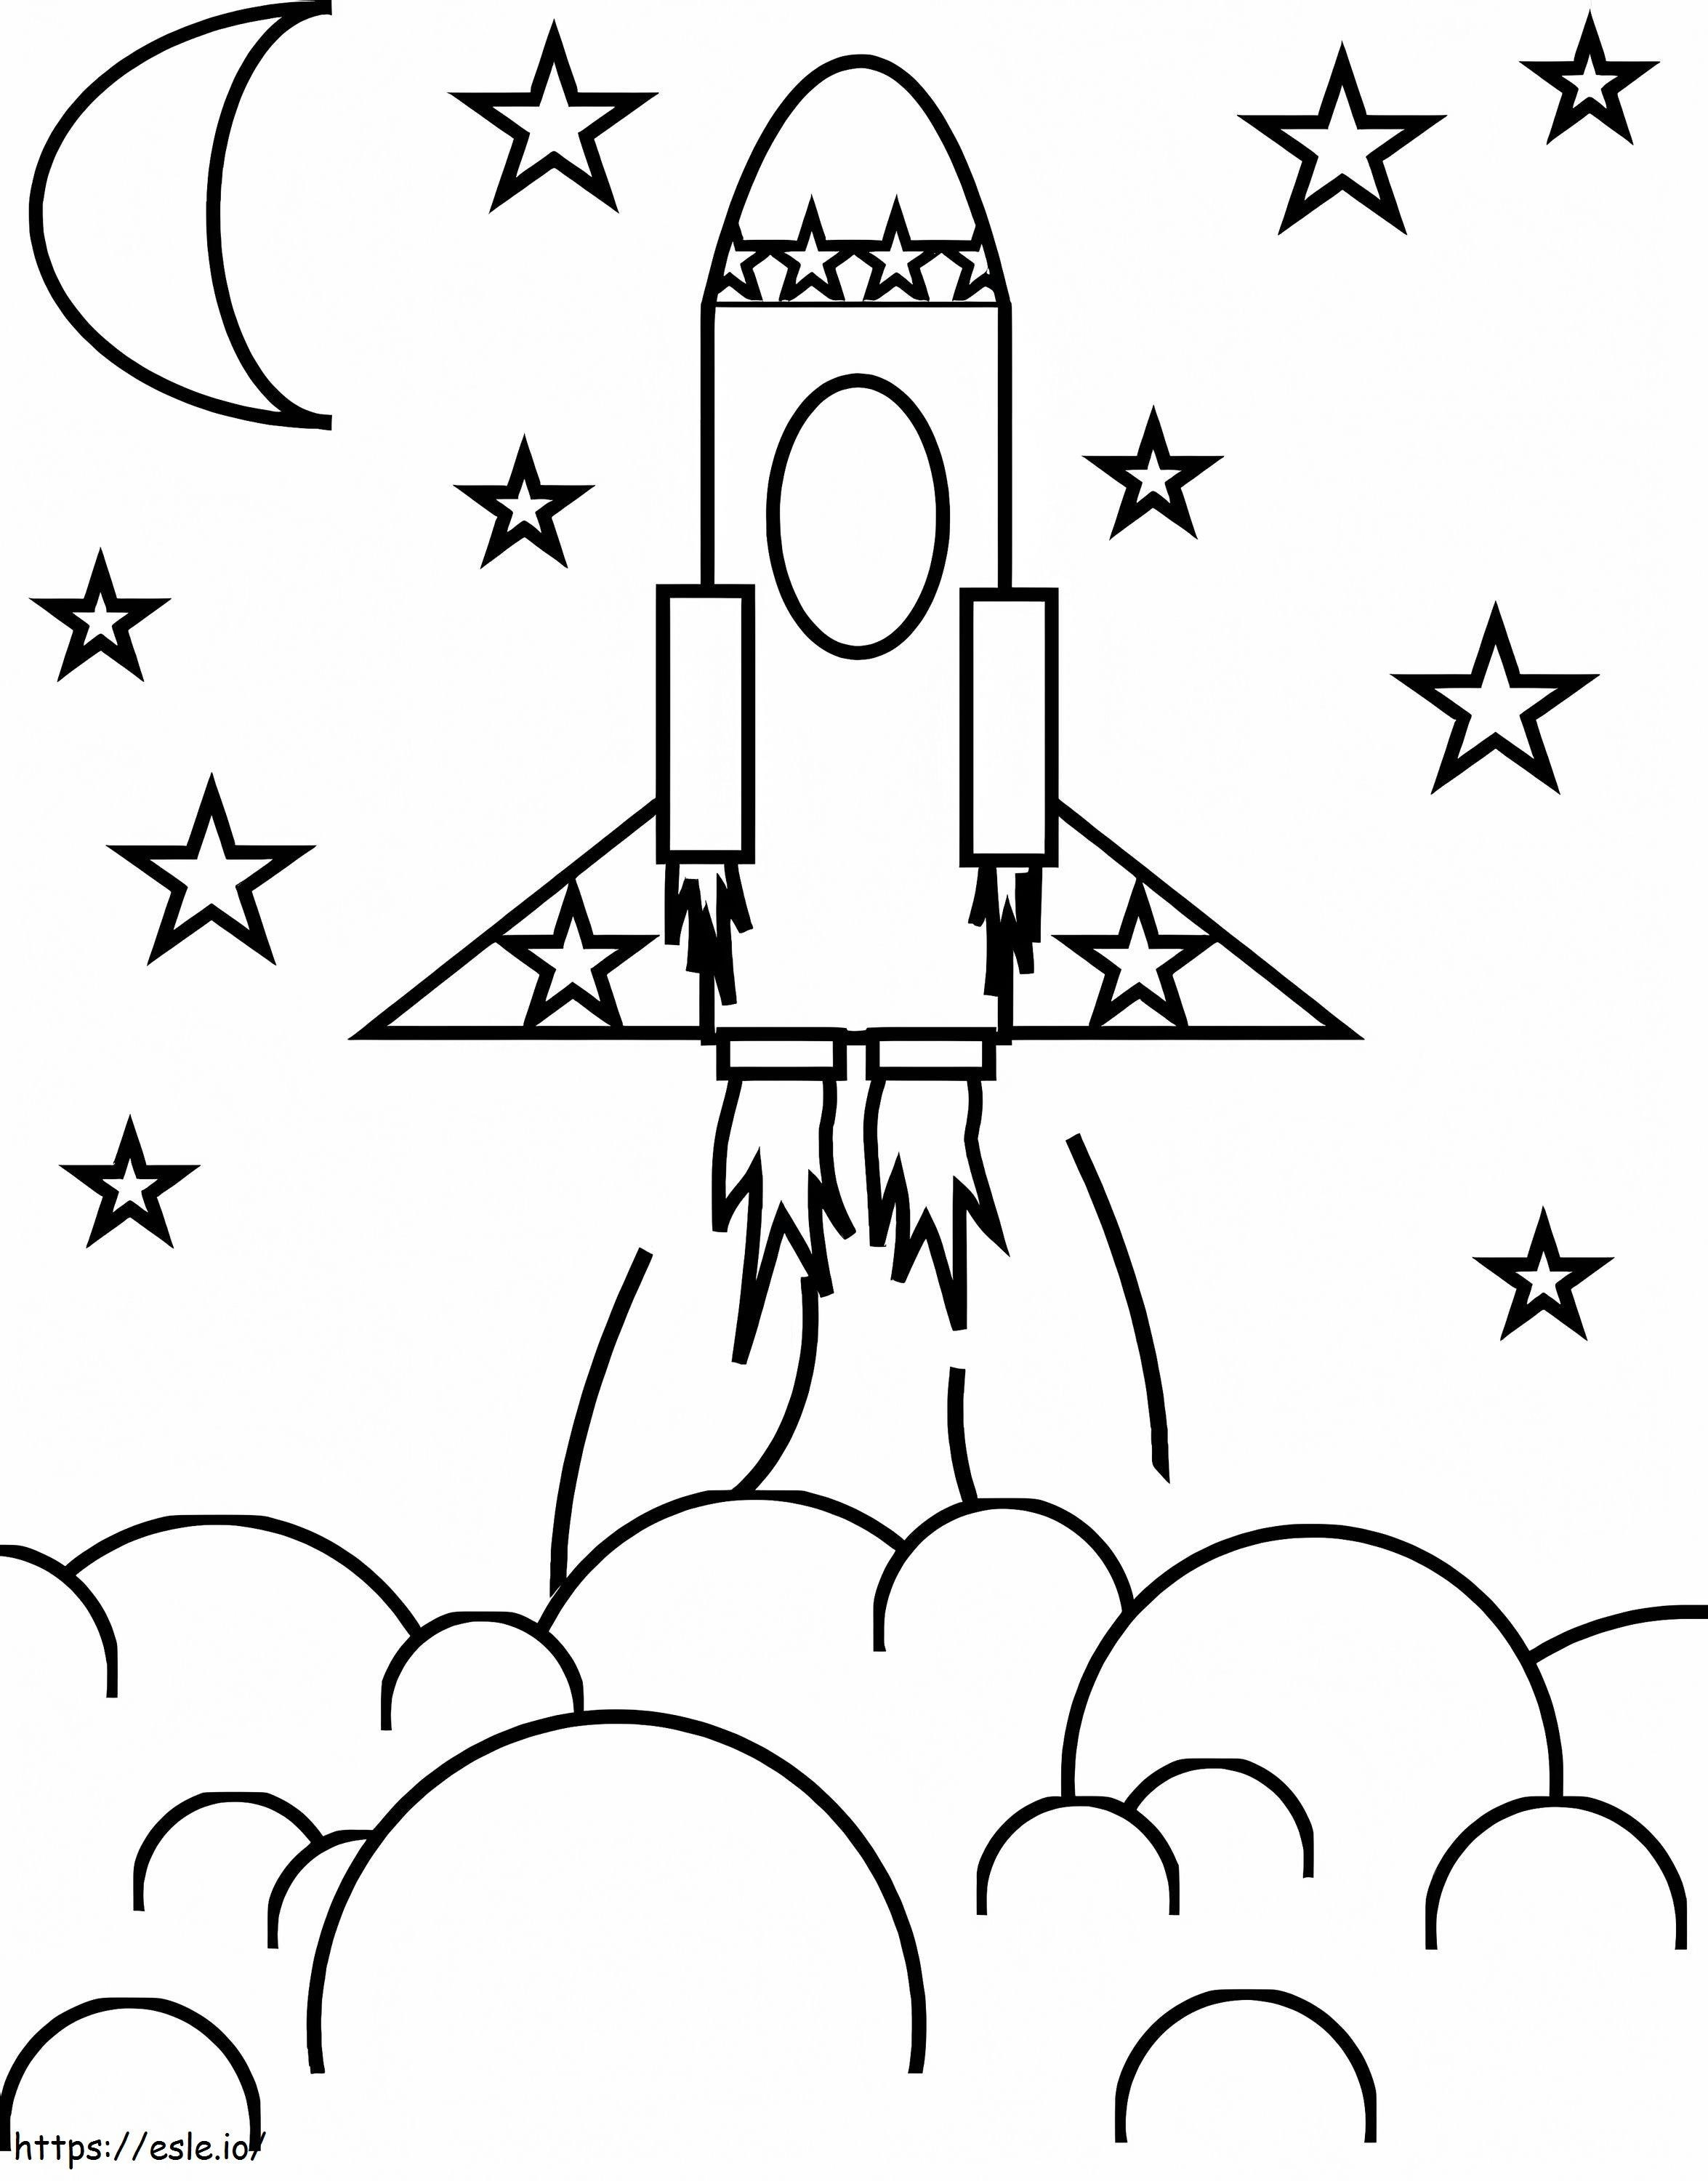 Rocket In A Sky coloring page